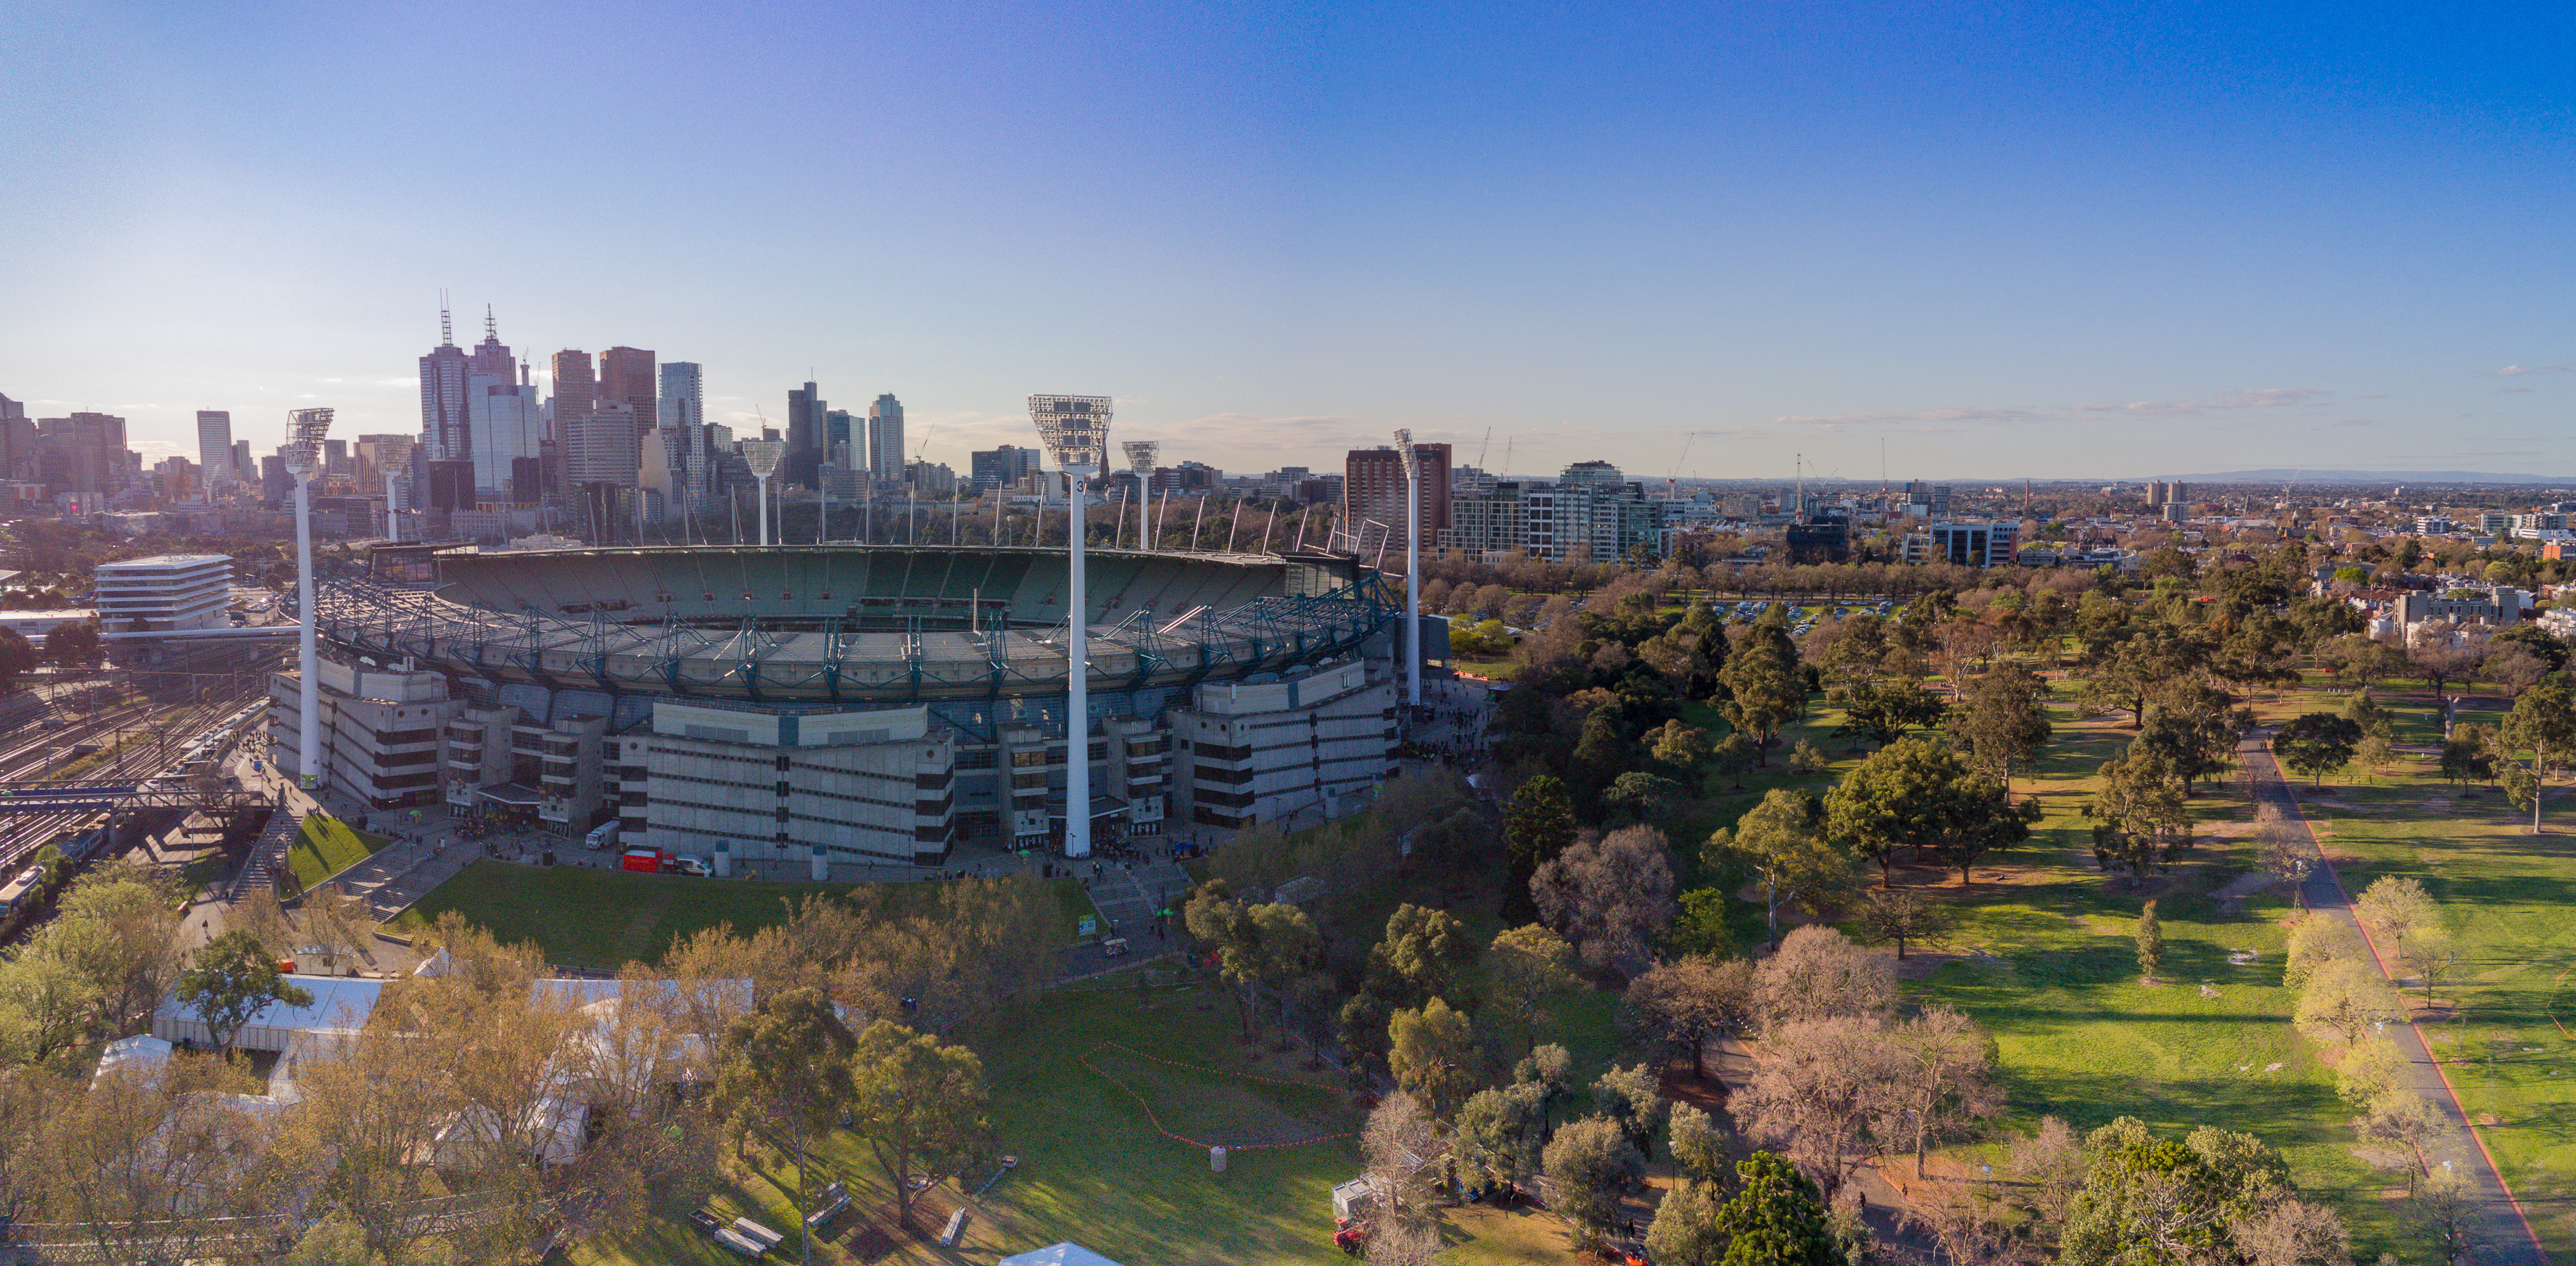 Aerial shot of the Melbourne Cricket Ground with Melbourne city skyline behind